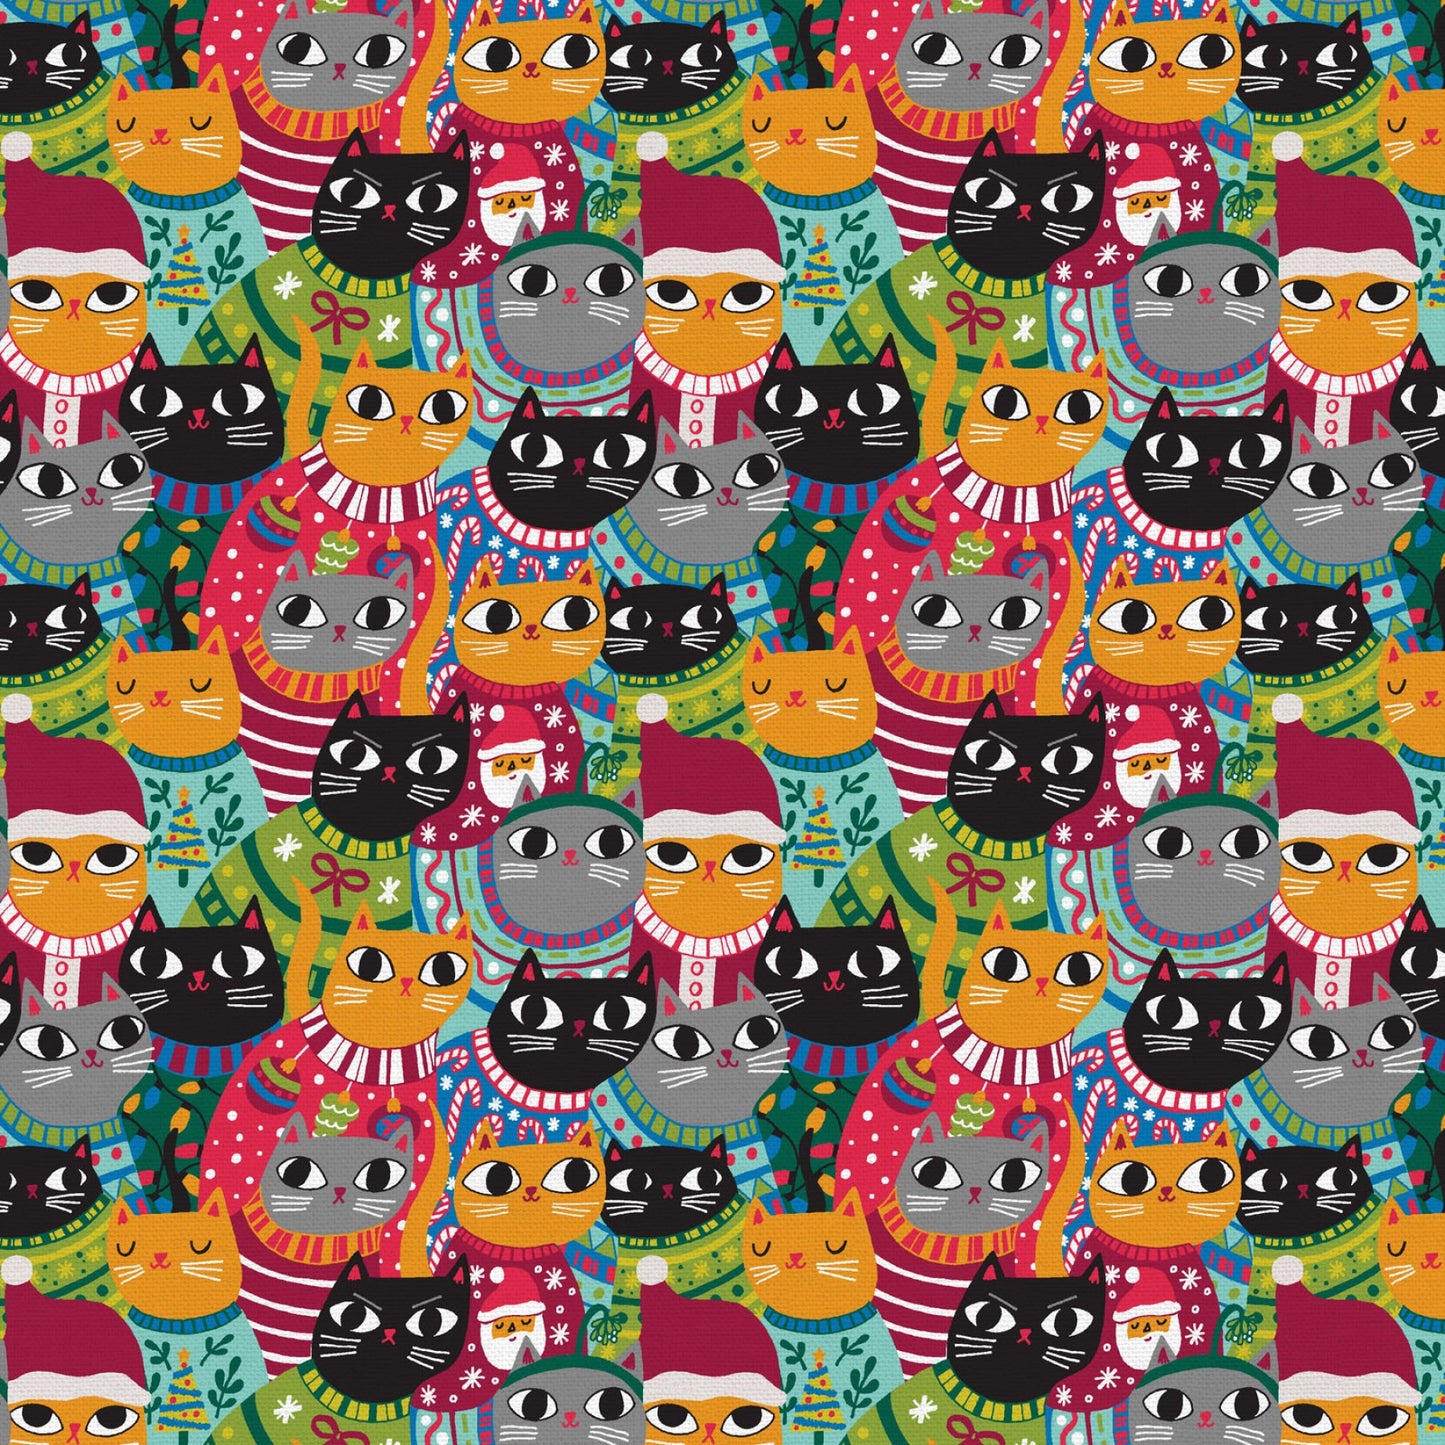 Christmas Sweater Cats- Sweater cats $19.96/m